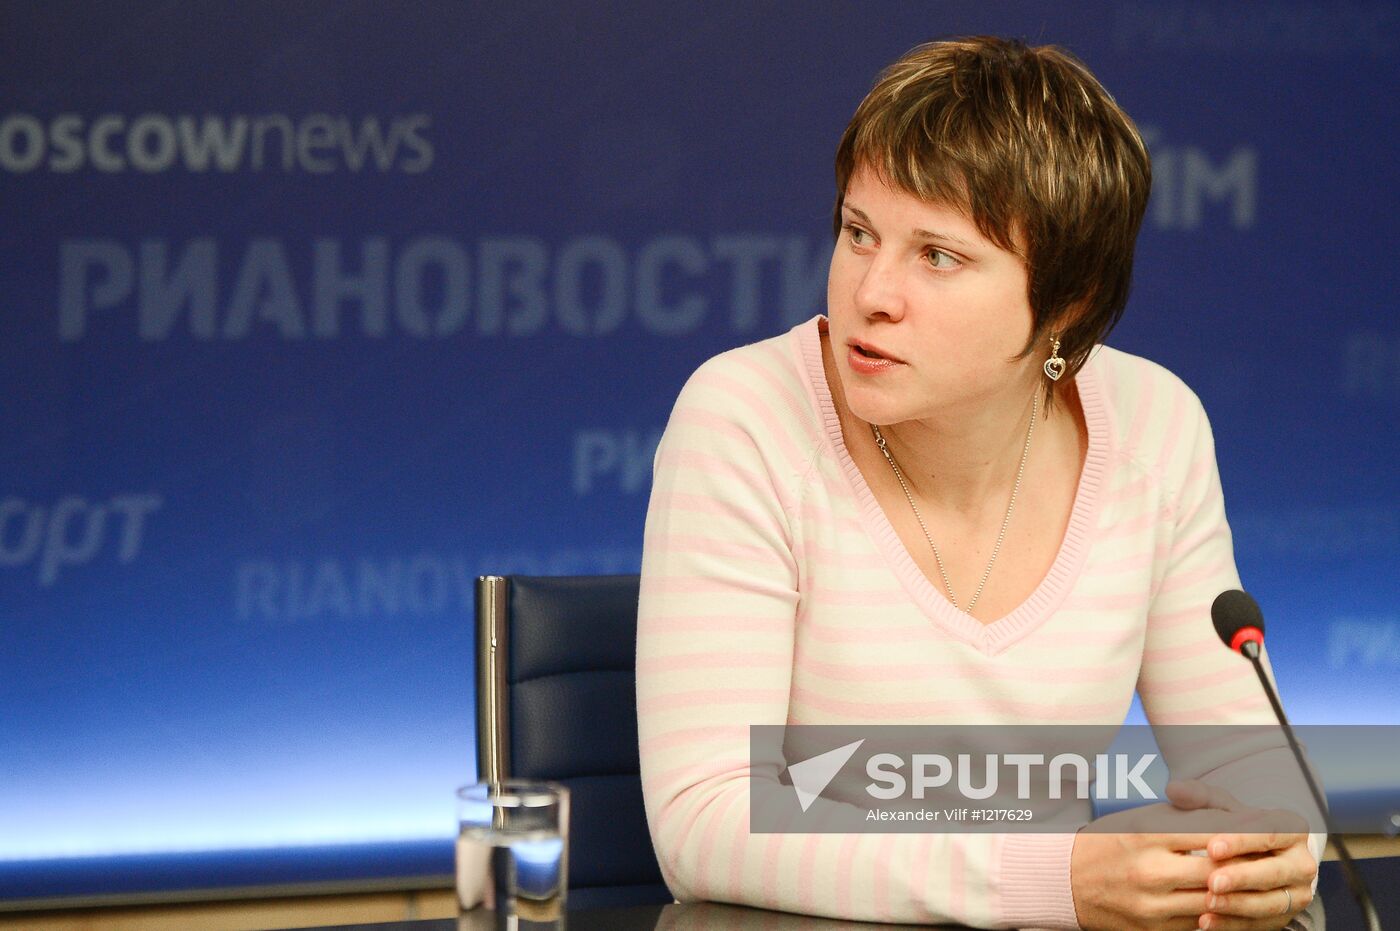 Anna Bogaliy-Titovets holds news conference